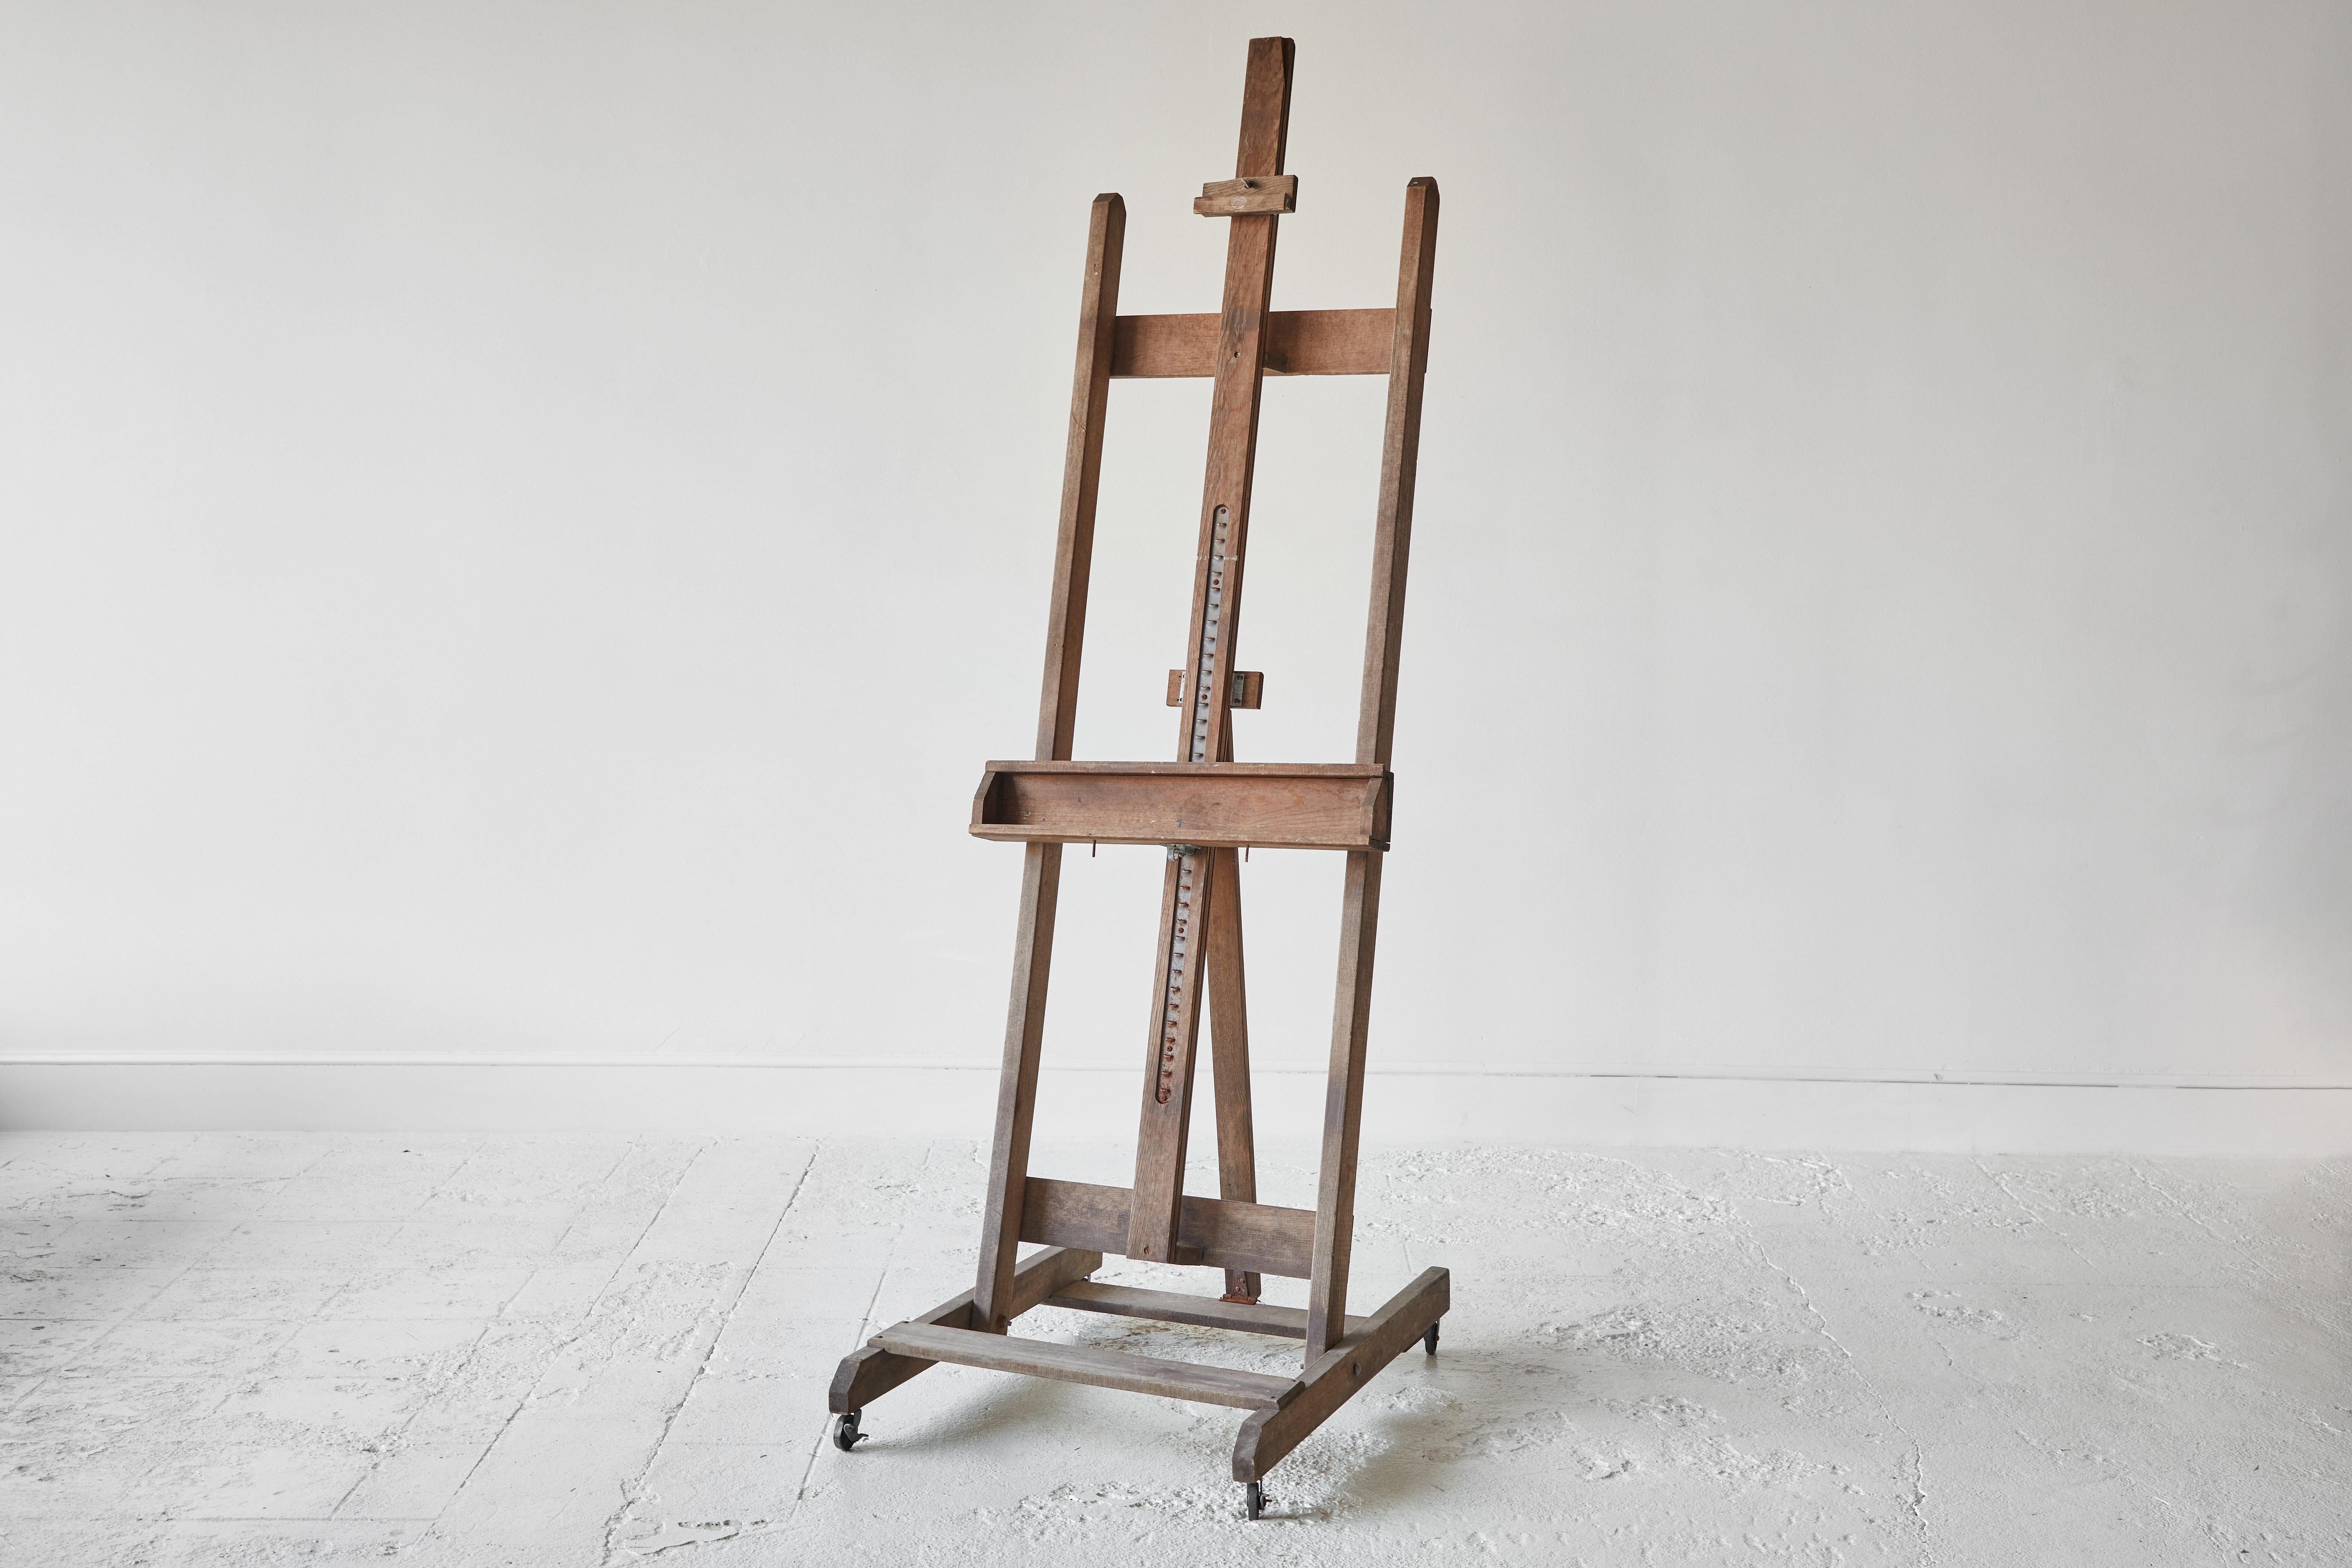 Vintage wooden painters easel with adjustable placements. This piece is one of a kind and unique.